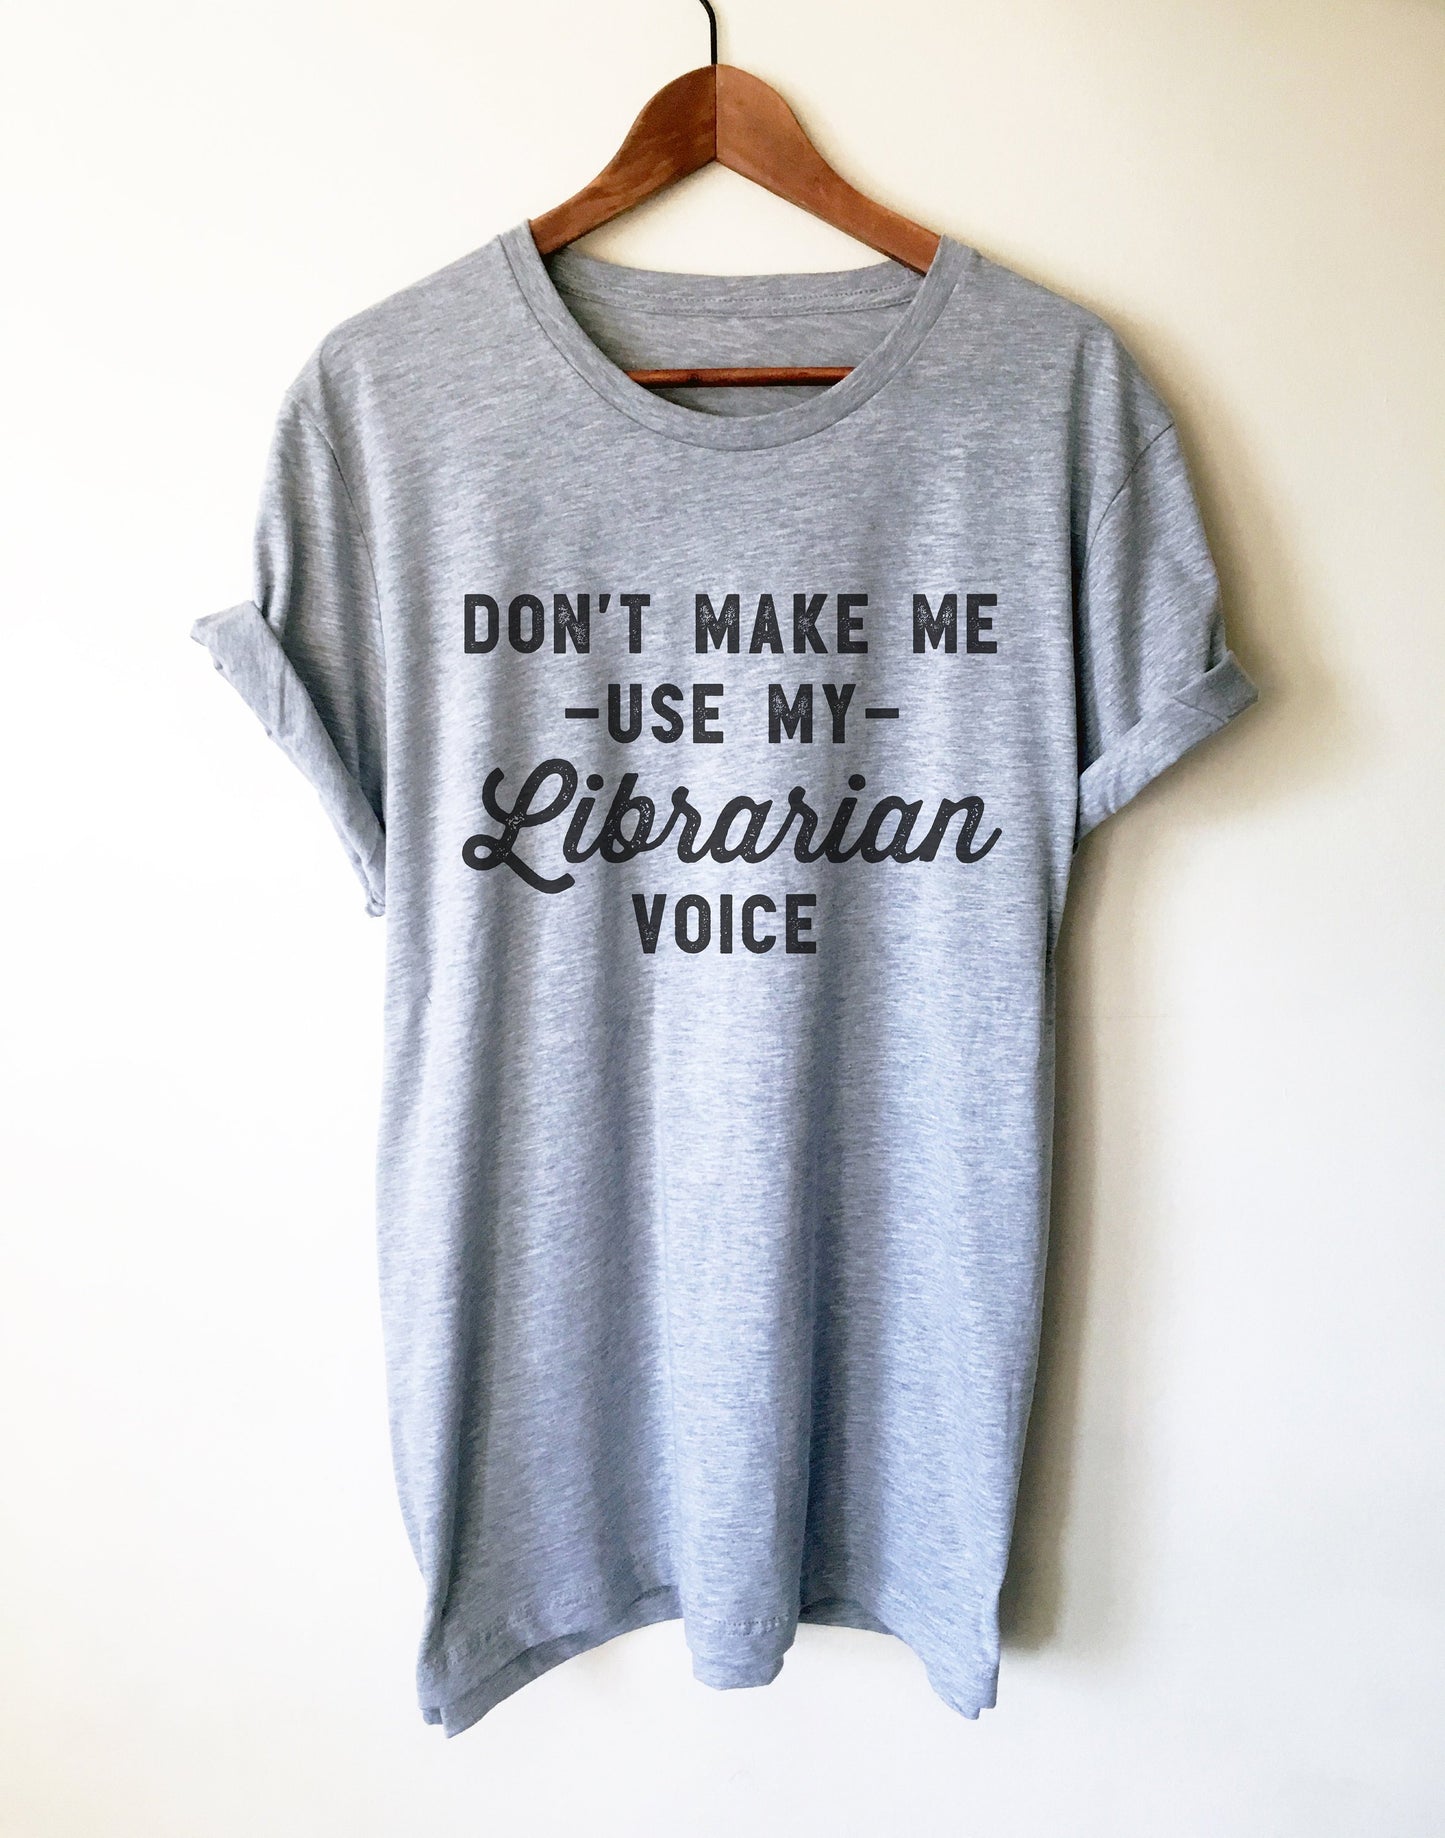 Don’t Make Me Use My Librarian Voice Unisex Shirt - Librarian Shirt, Librarian Gift, Reading Shirts, Book Lover Gift, Book Shirt, Bookworm